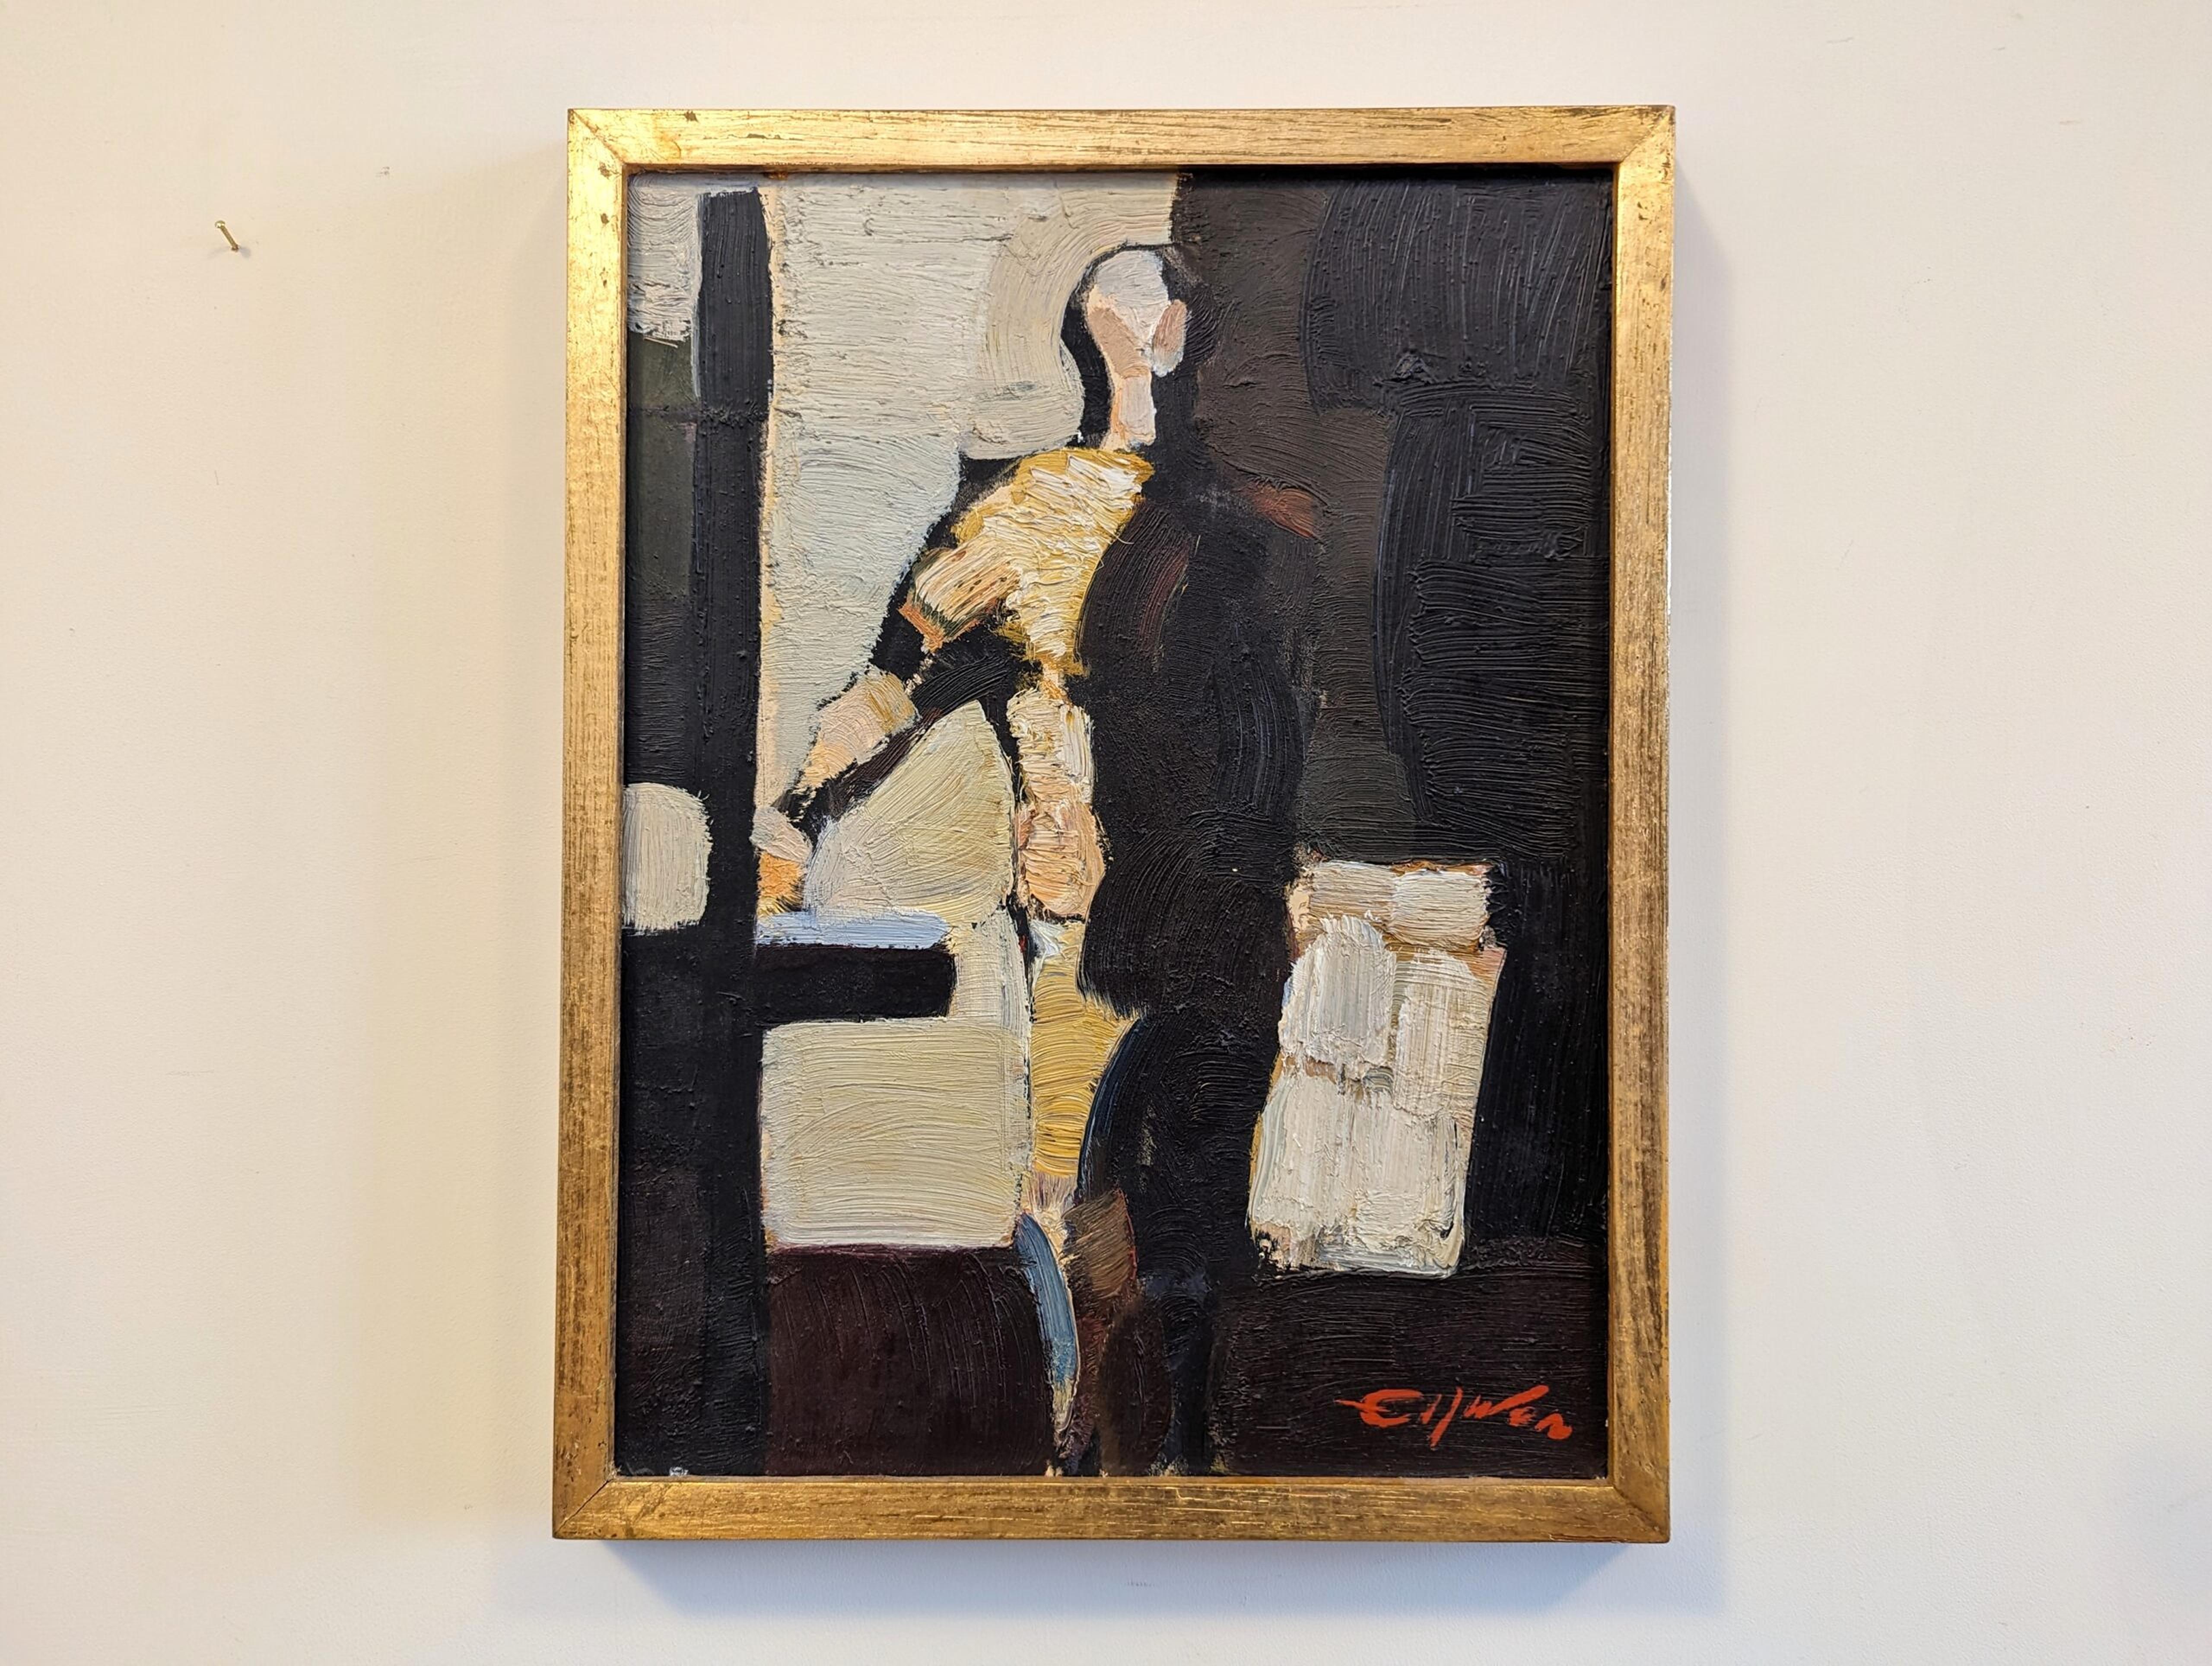 IN THE SHADOWS
Size: 39 x 30 cm (including frame)
Oil on canvas

An outstanding mid-century abstract figurative painting, executed in oil onto board.

A figure standing in an interior setting, with one hand resting on a raised platform, punctuates